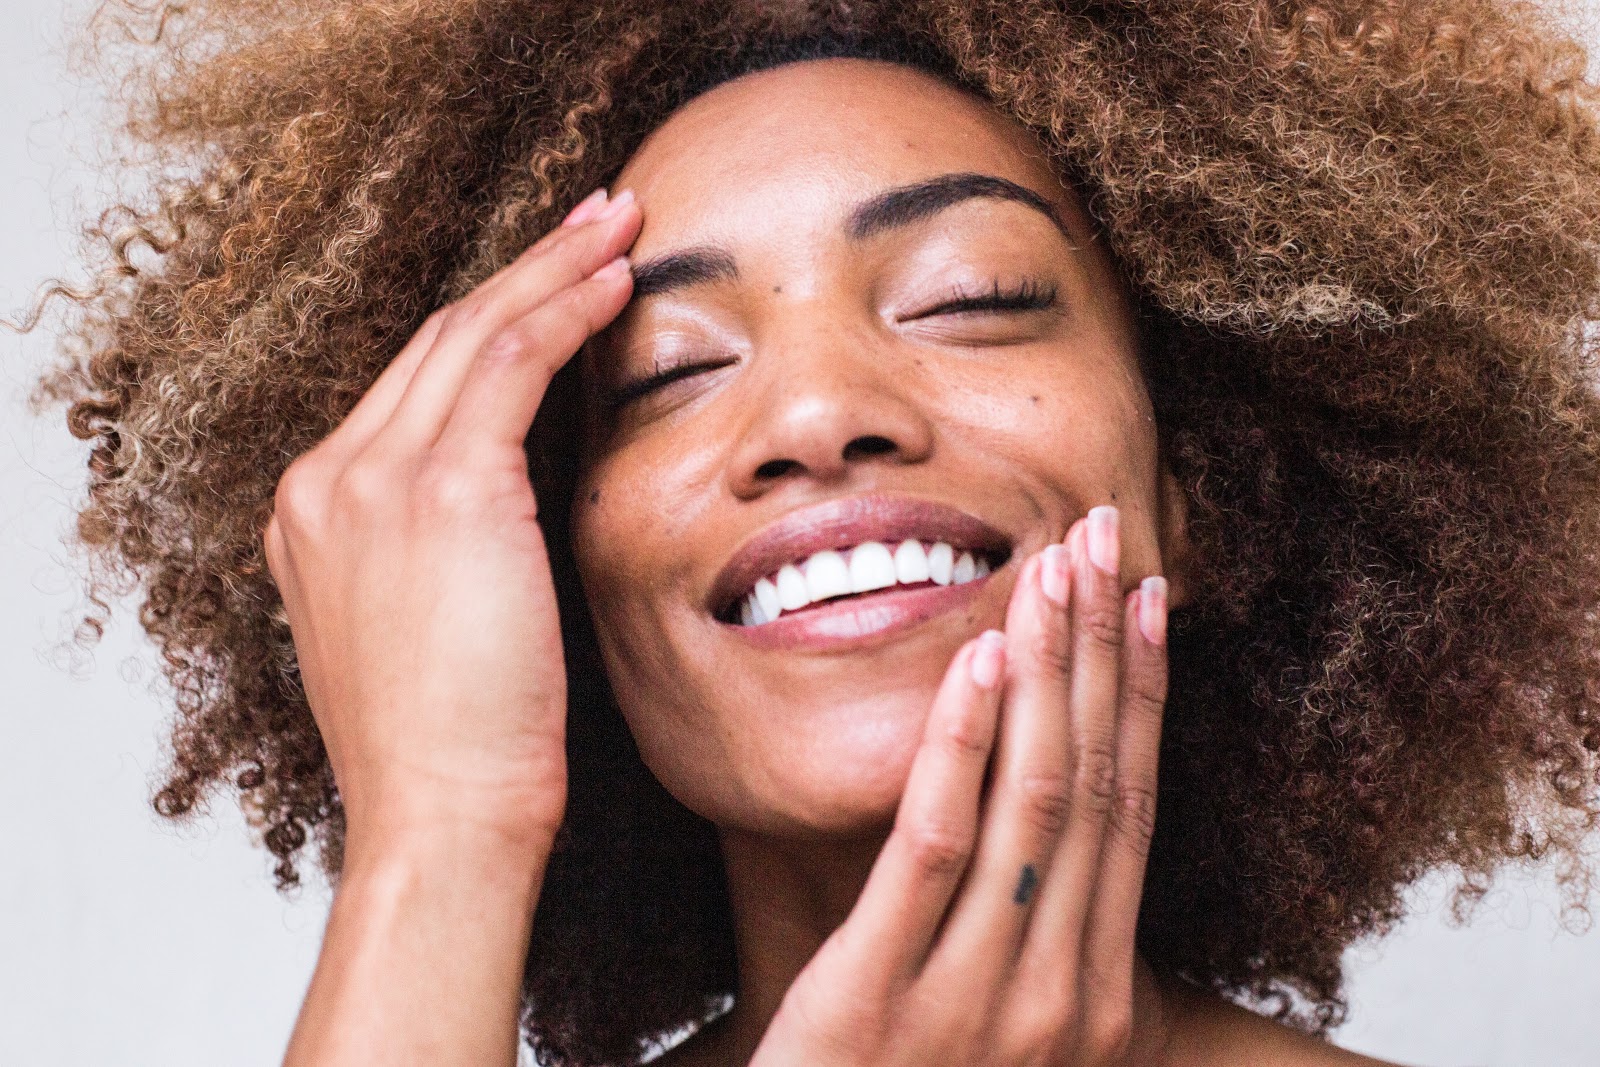 Taking Care of Your Skin: Why and What You Should Do